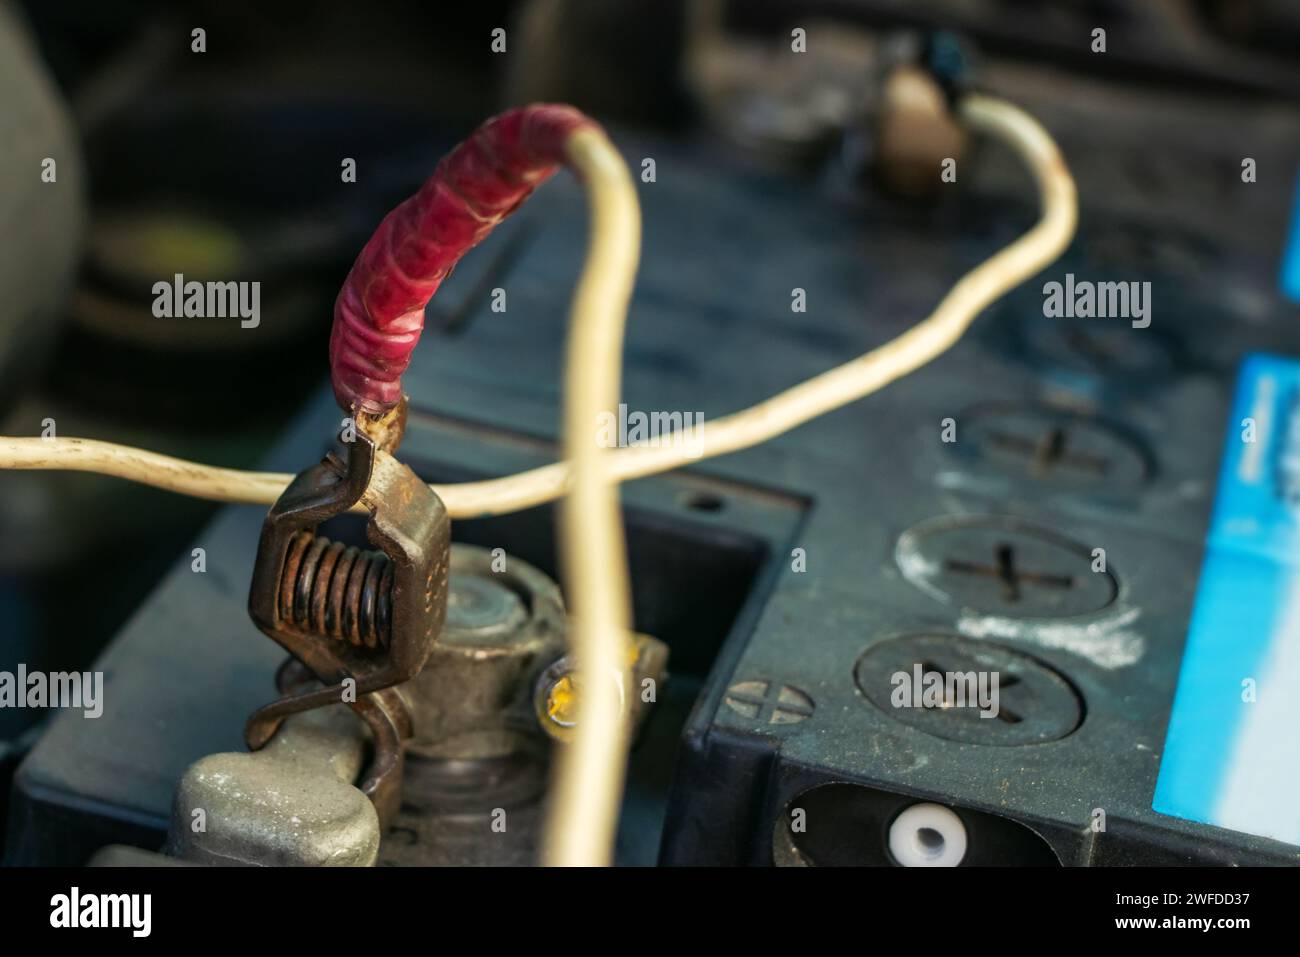 car booster jumper cables charging automobile discharged dead battery close up. Stock Photo